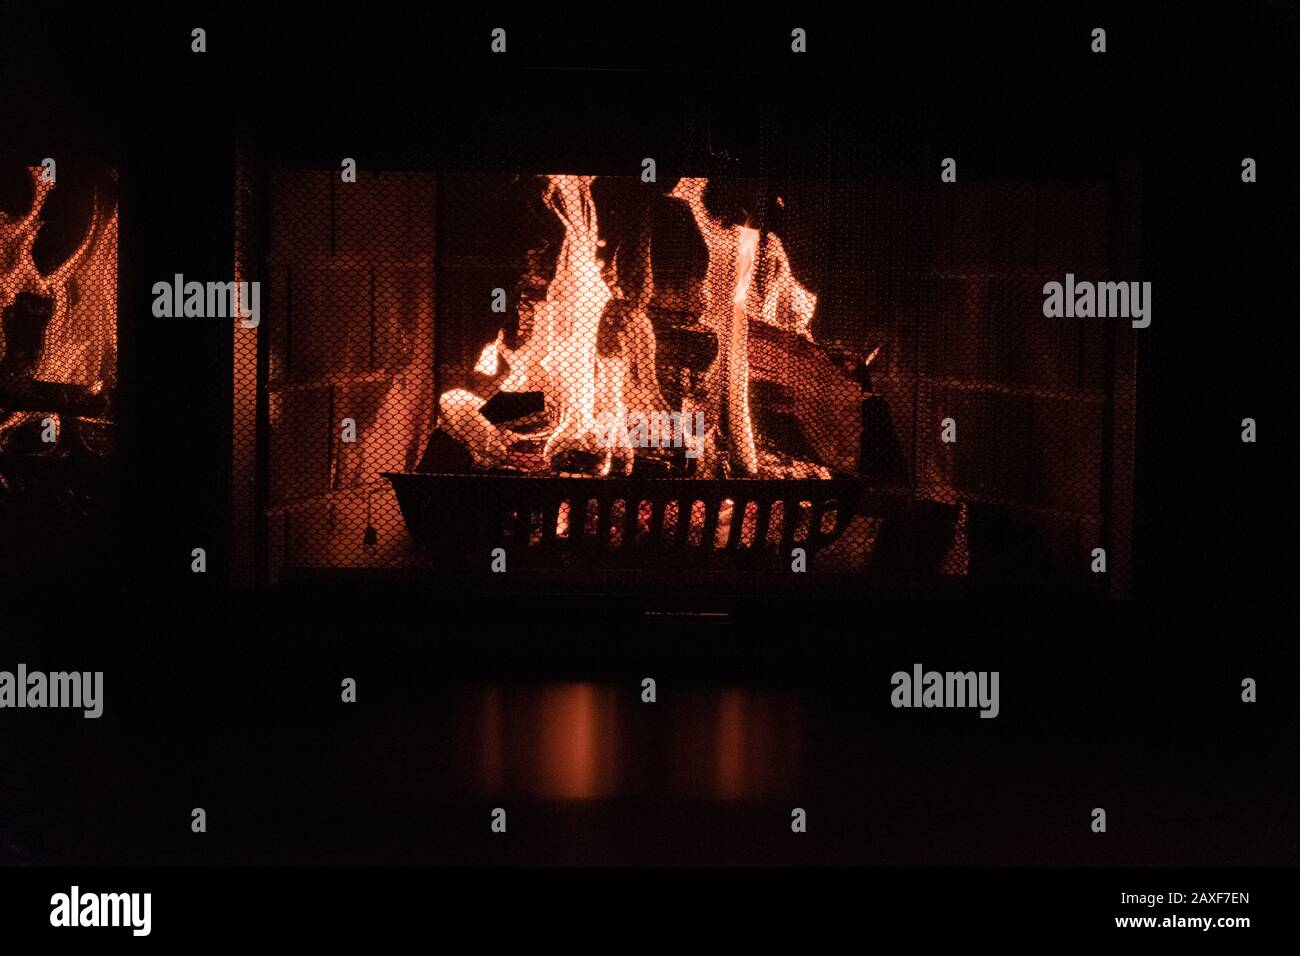 Closeup shot of a fire in a brick fireplace with screen Stock Photo